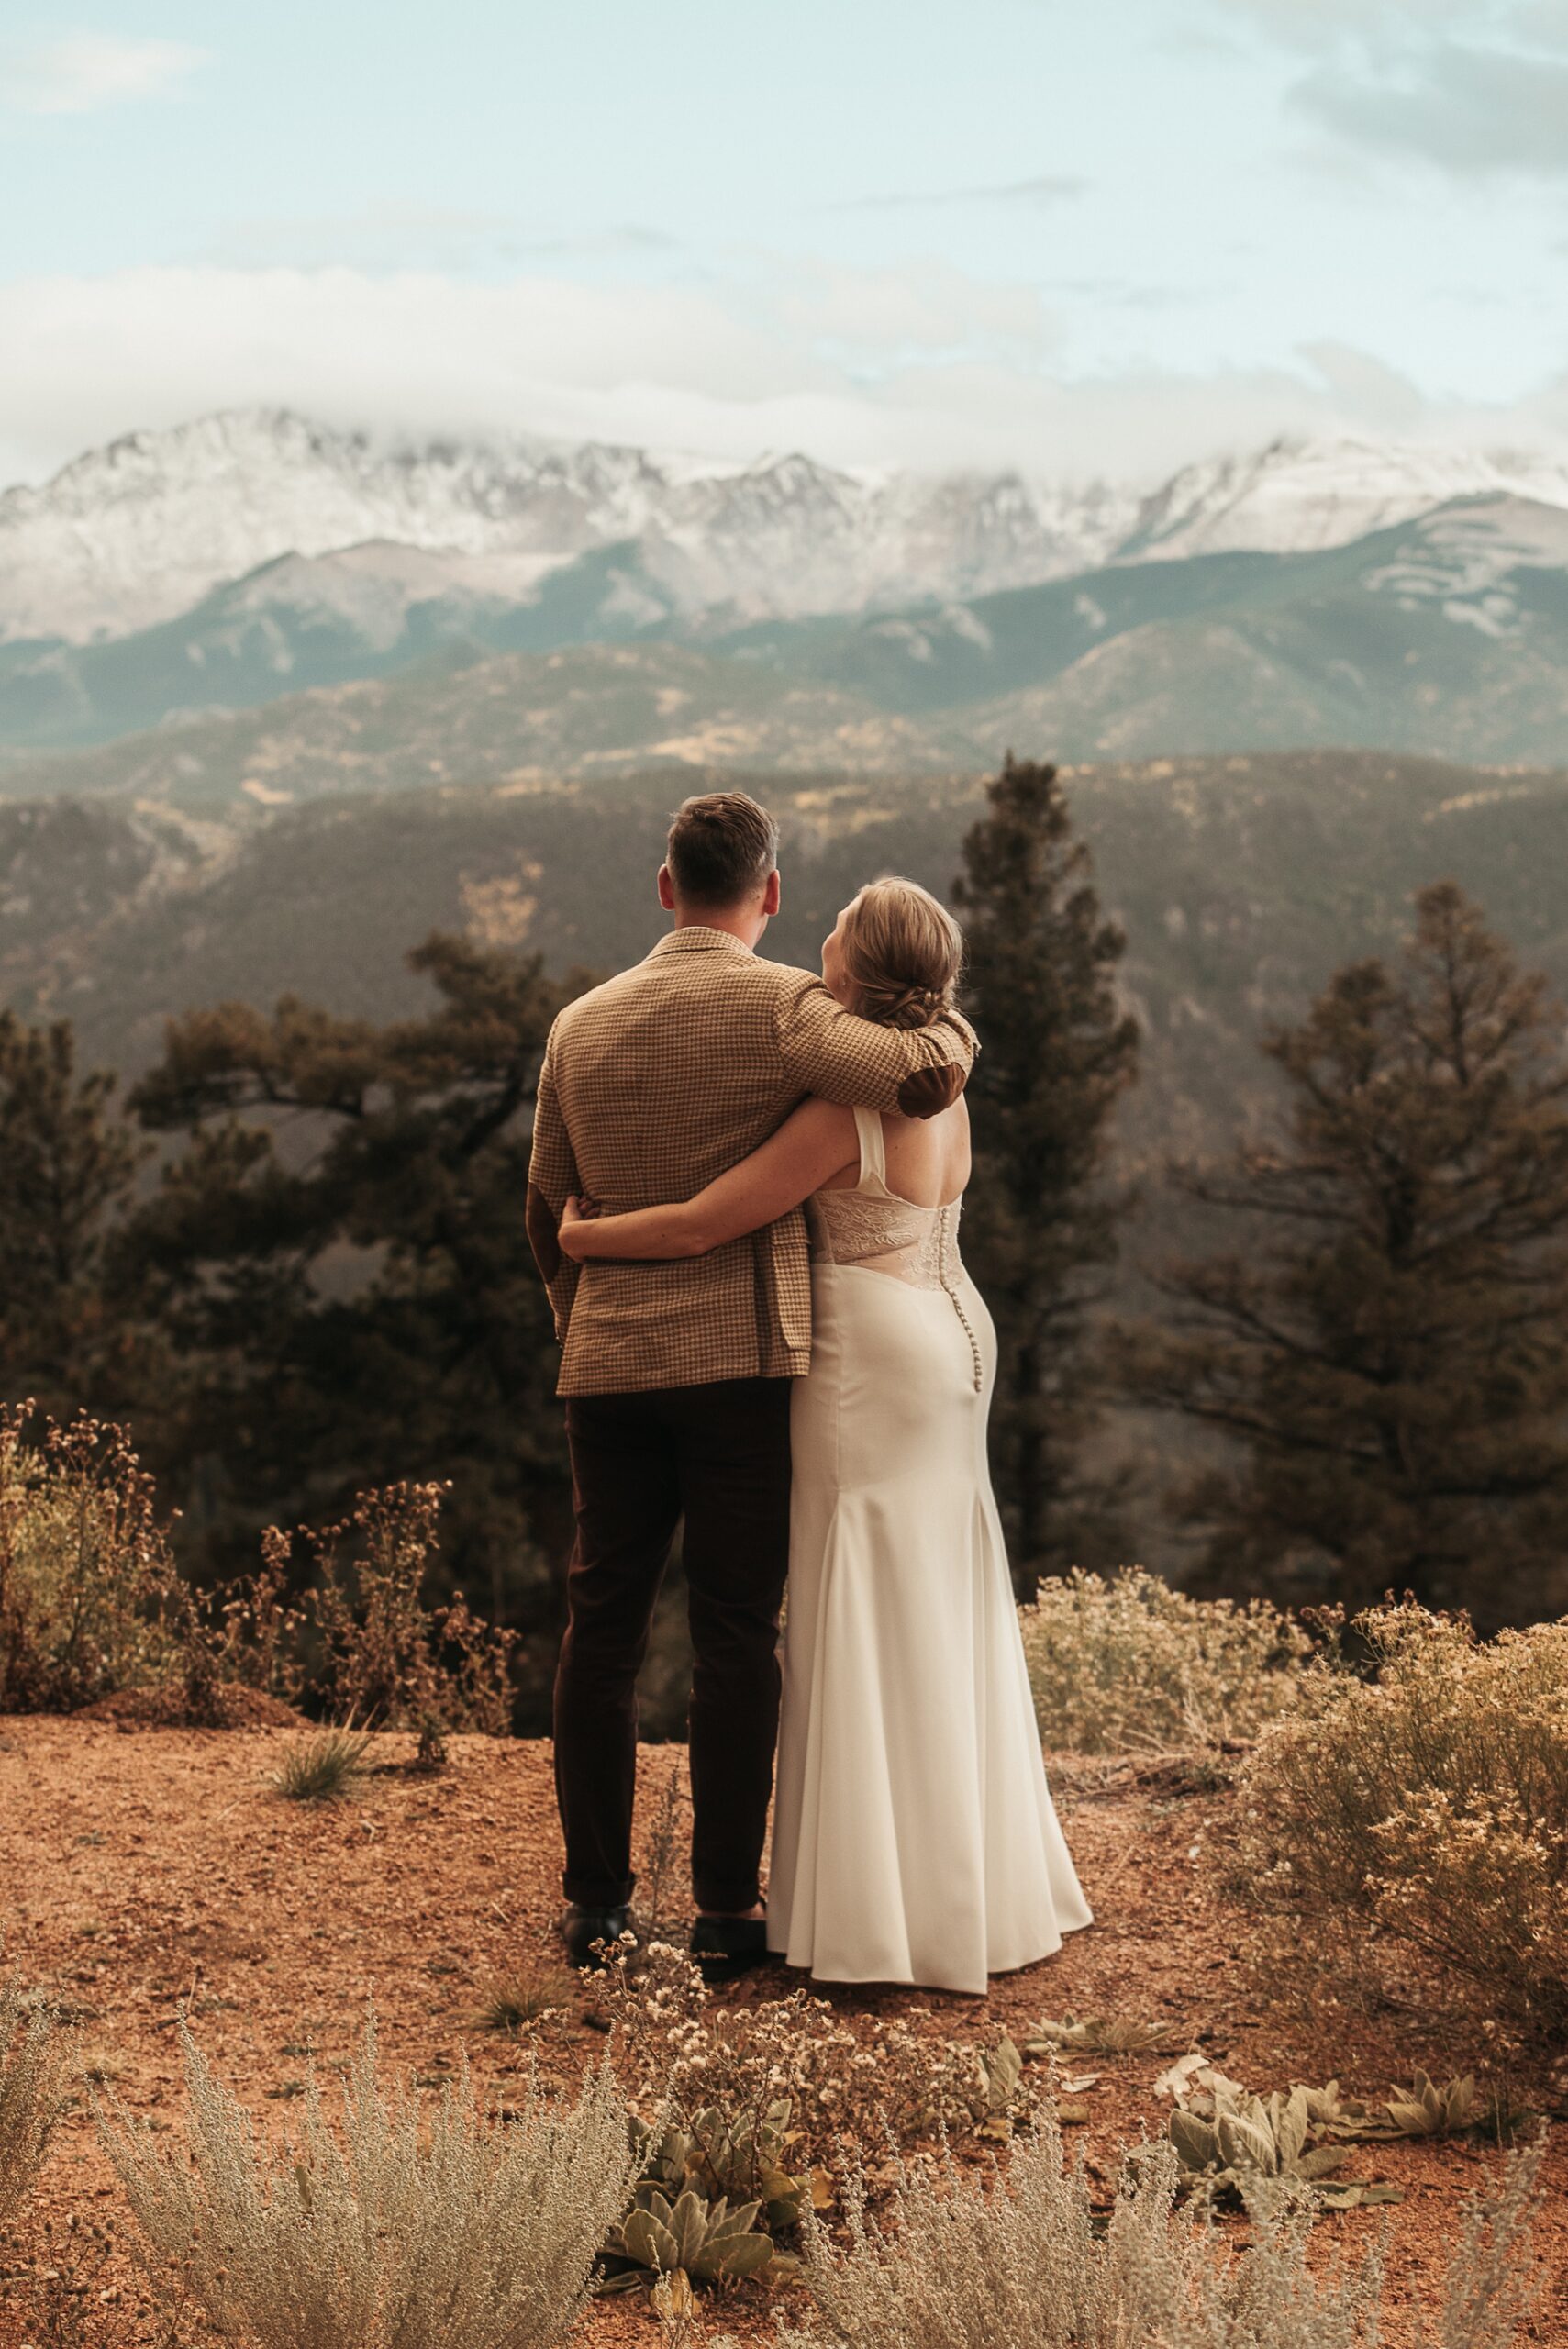 Bride and groom looking out at mountains at Airbnb wedding venue in Colorado